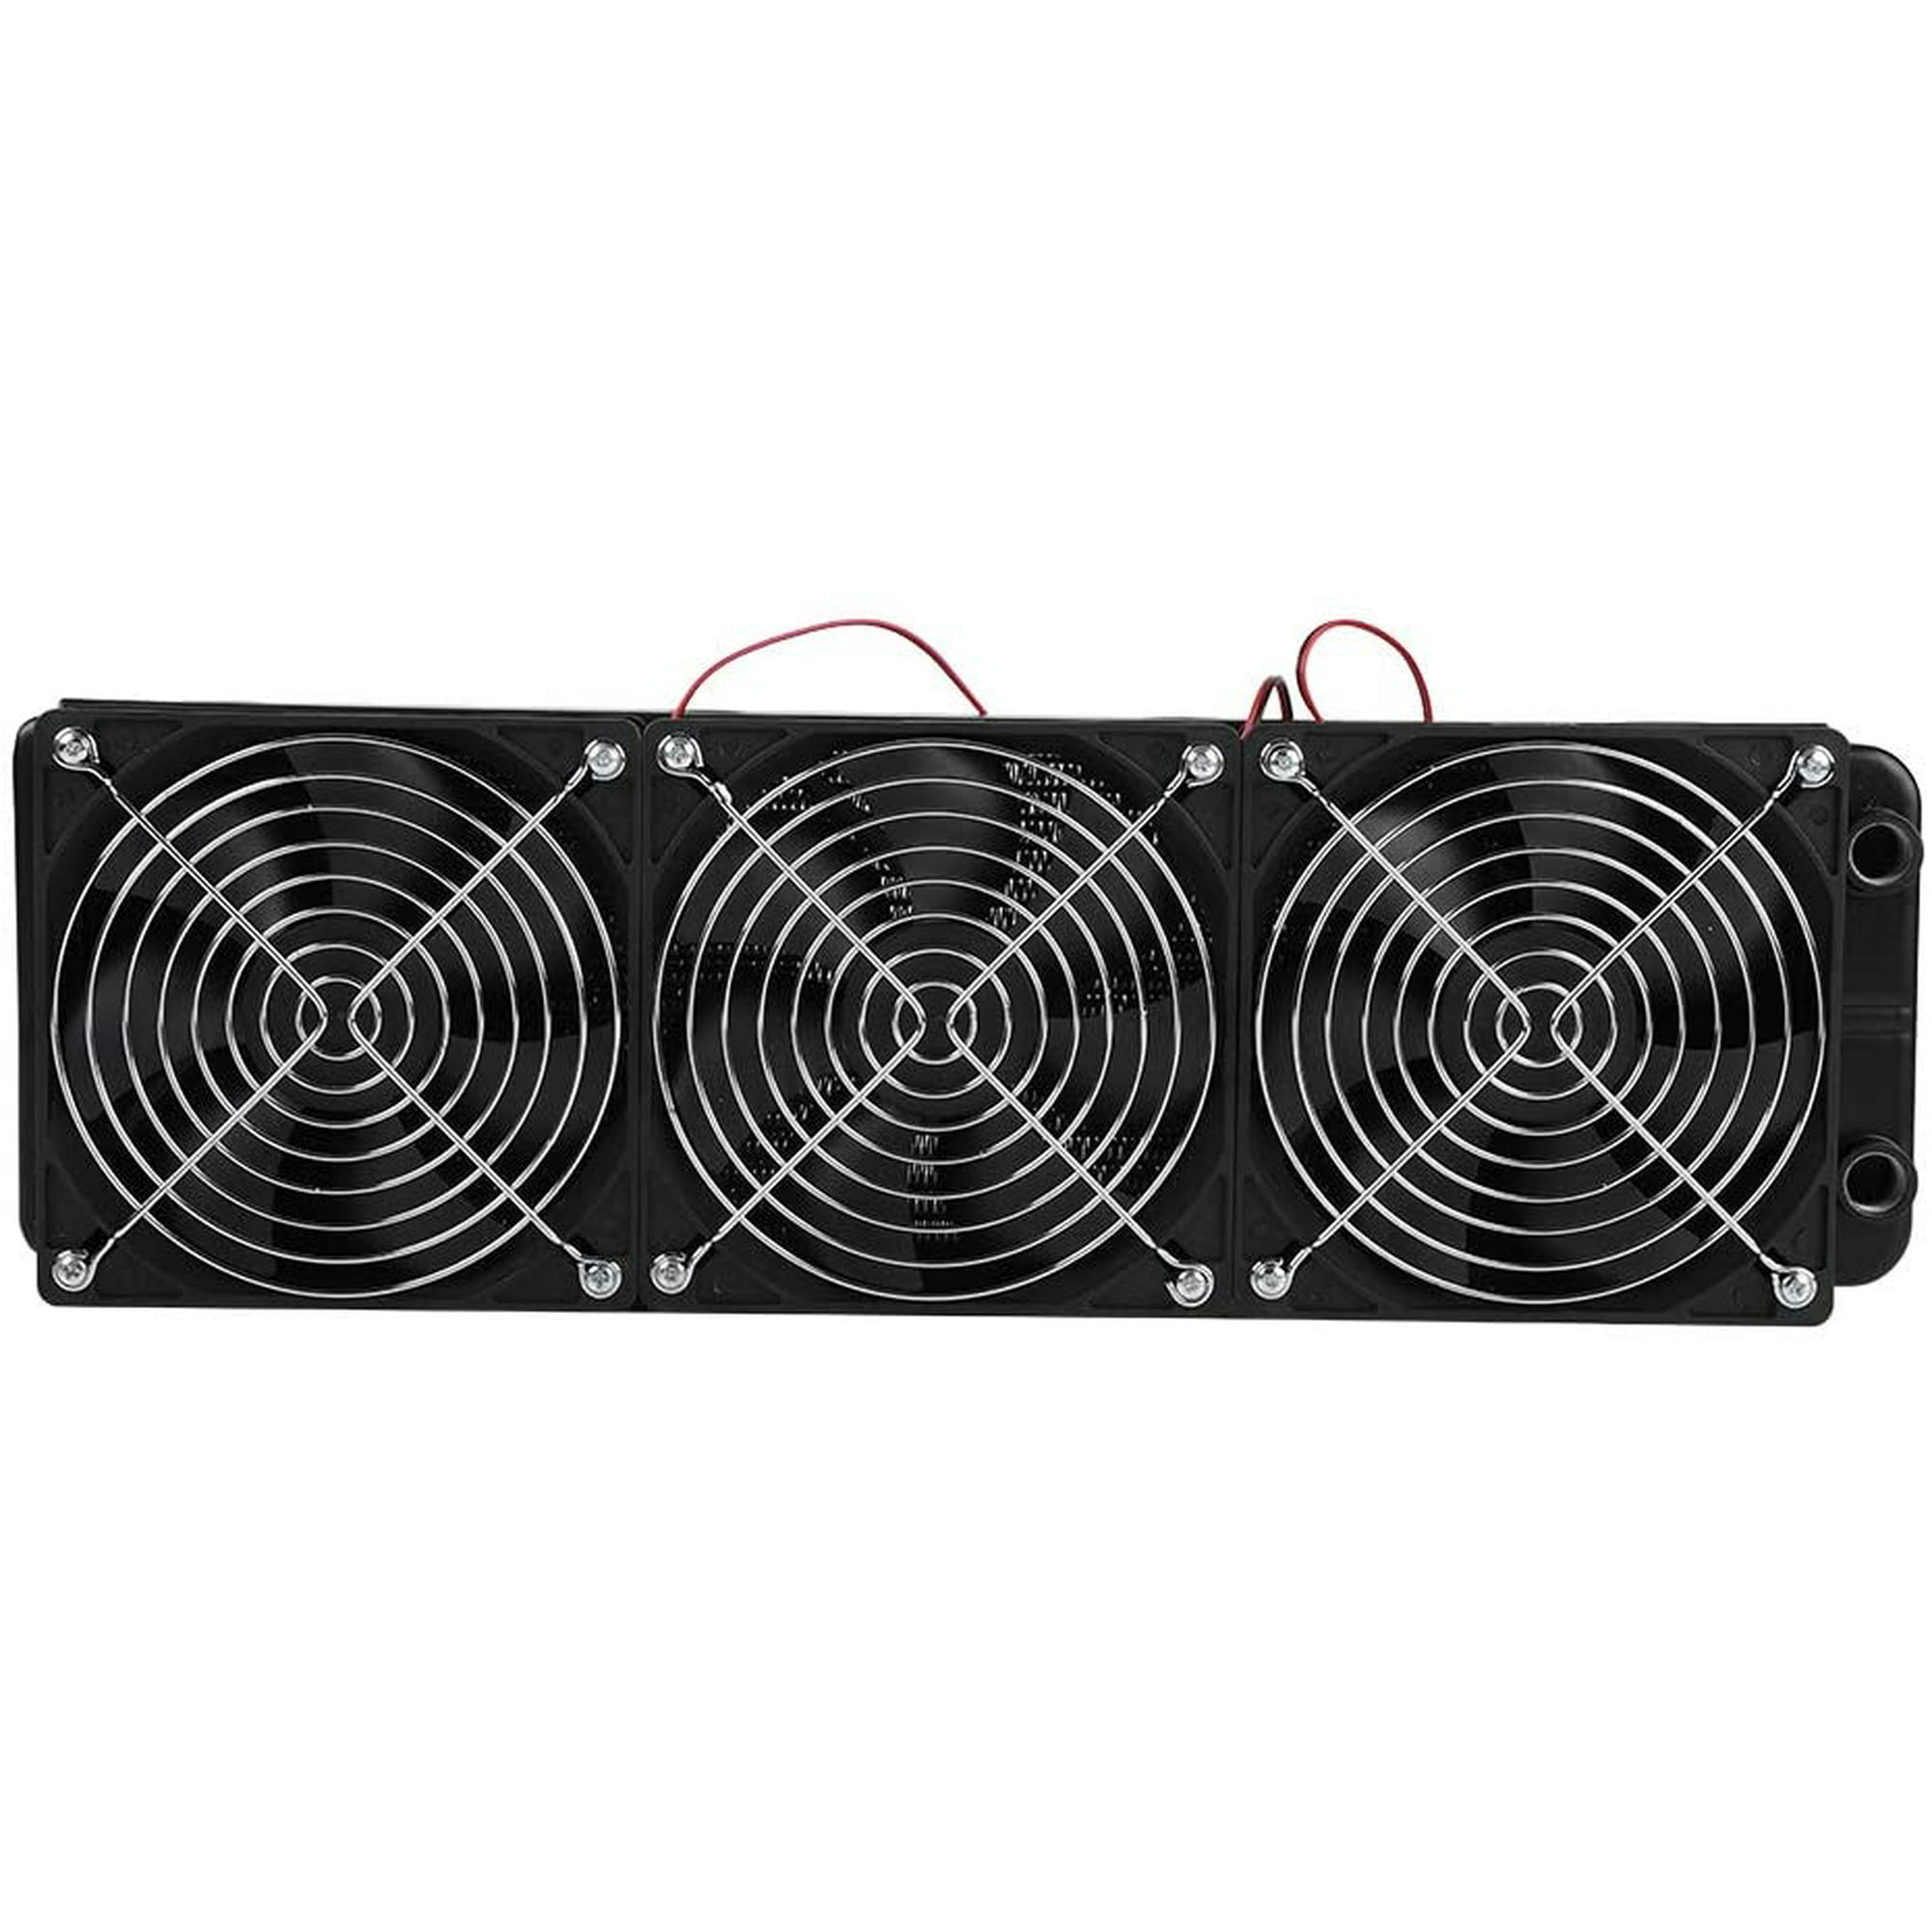 360mm Variable Easy to Use Water Cooling Radiator for Computer CPU 